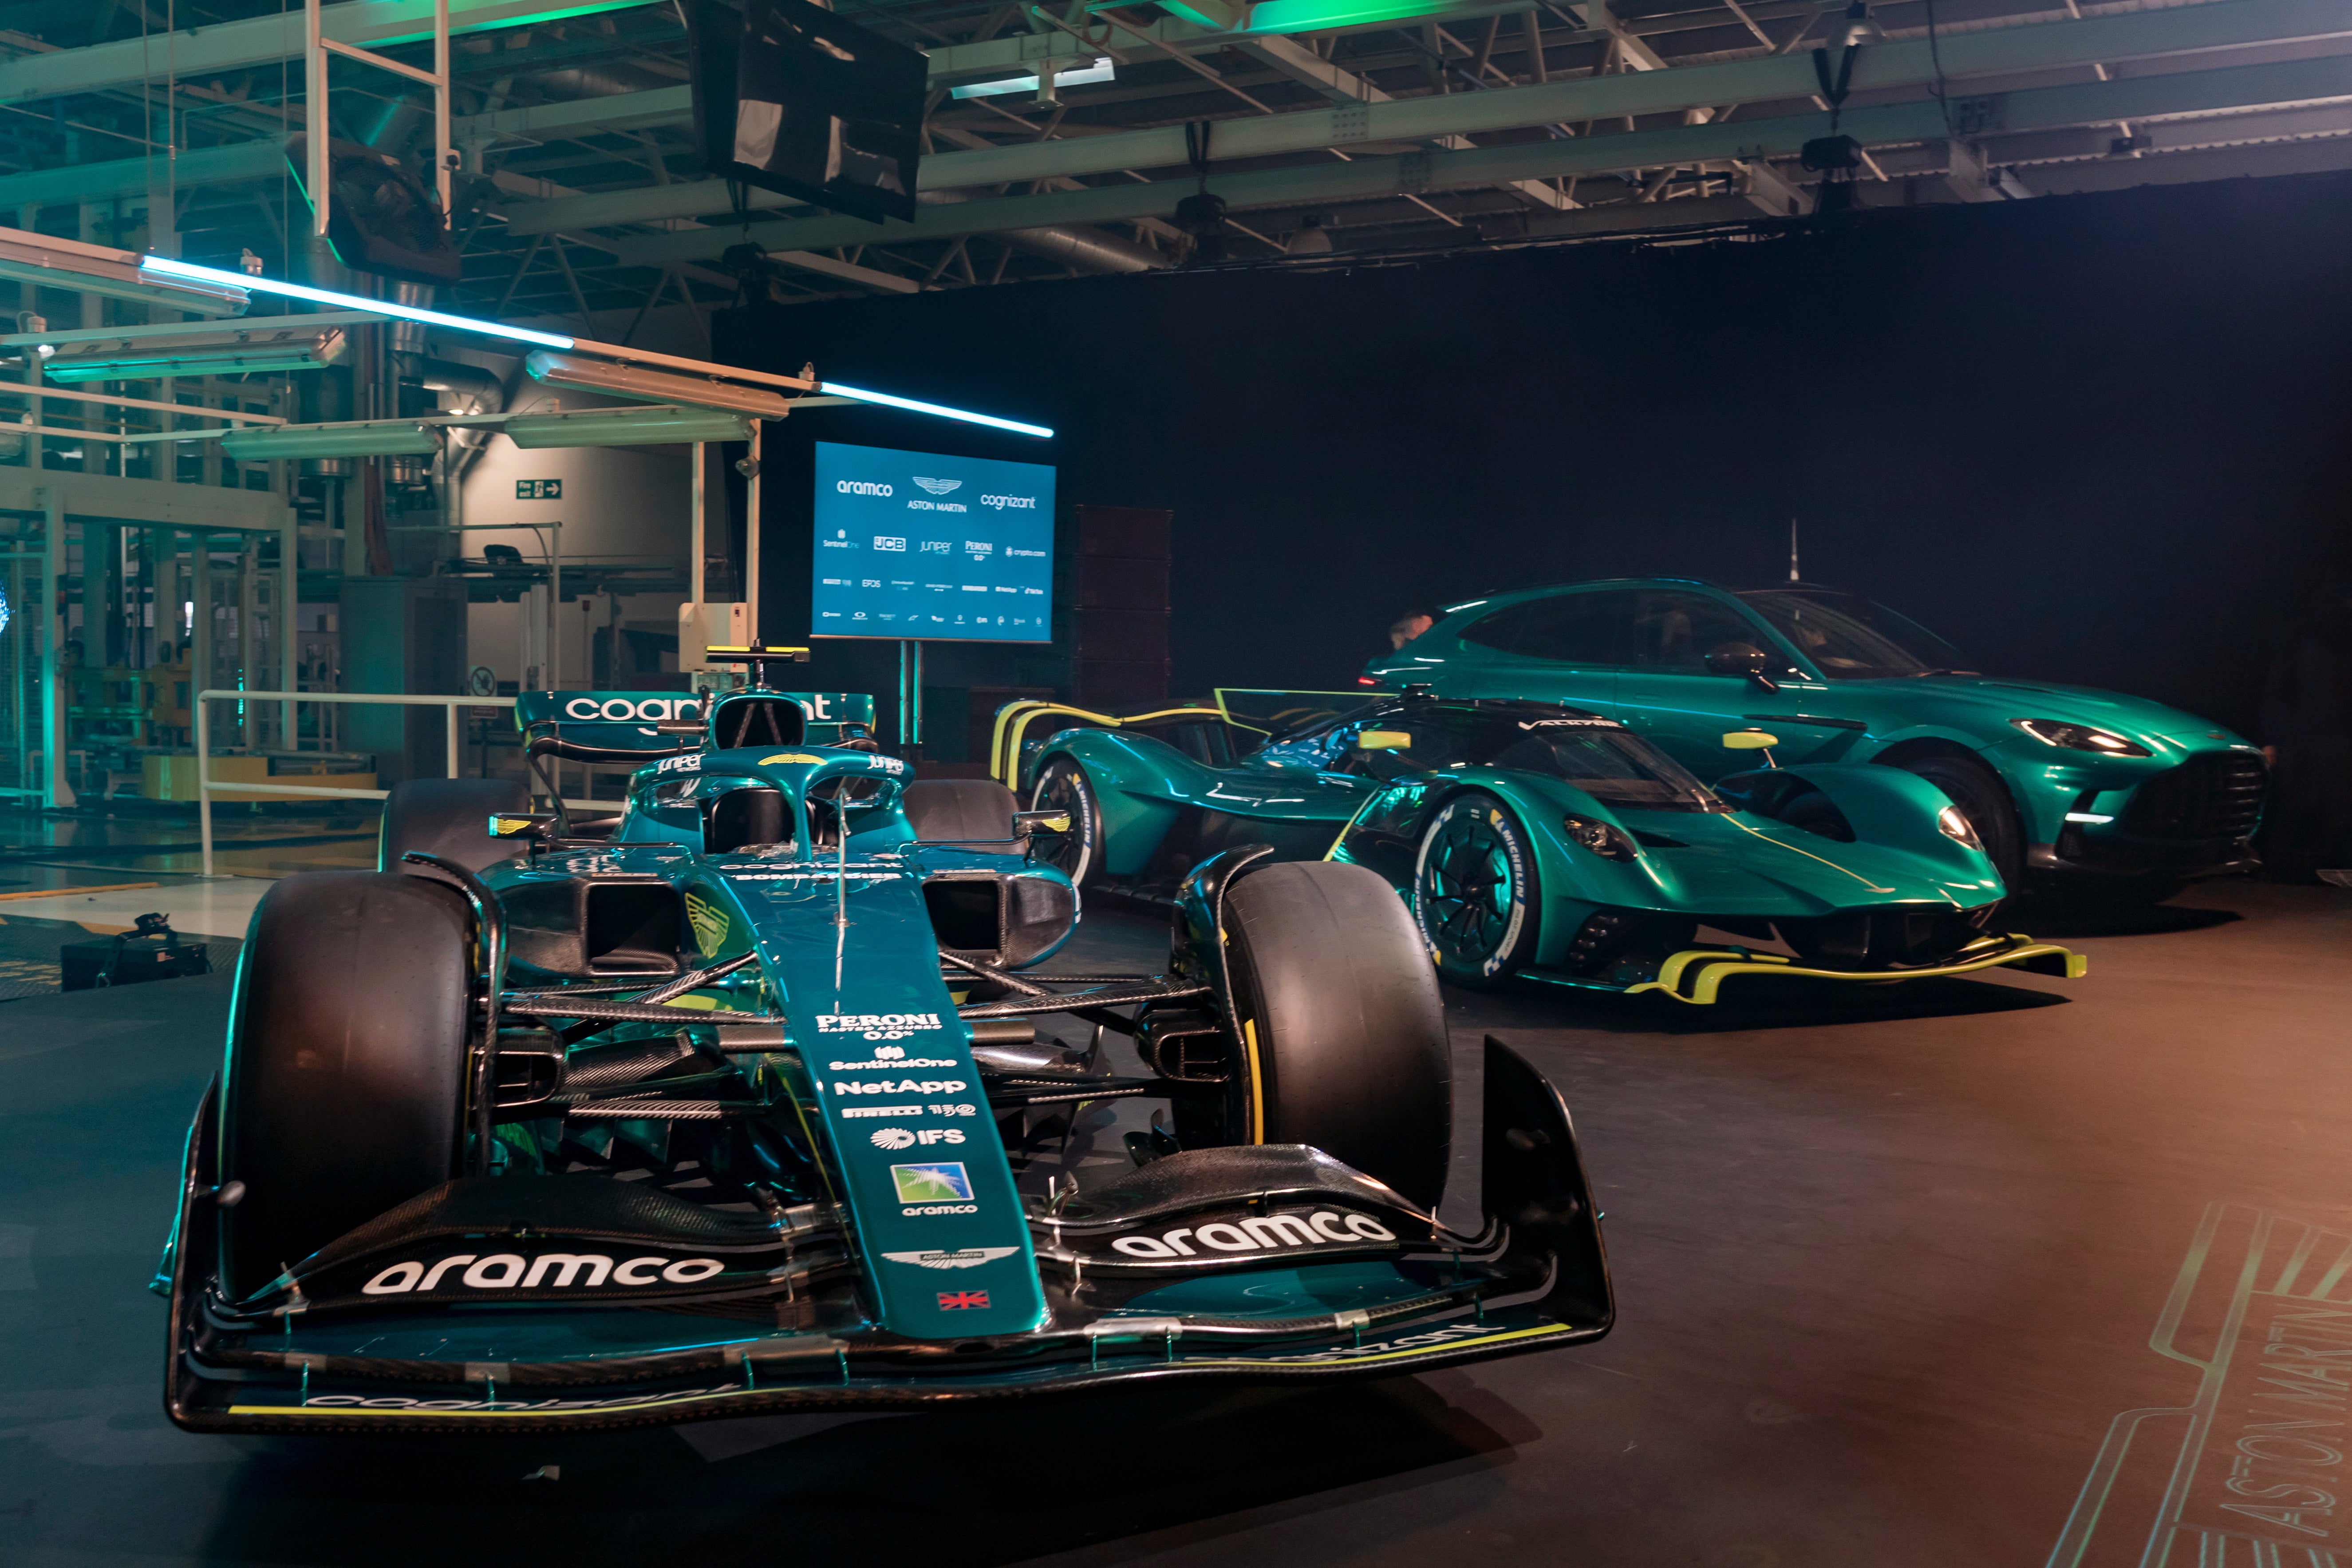 Aston Martin are aiming to win the F1 world championship within the next five seasons.